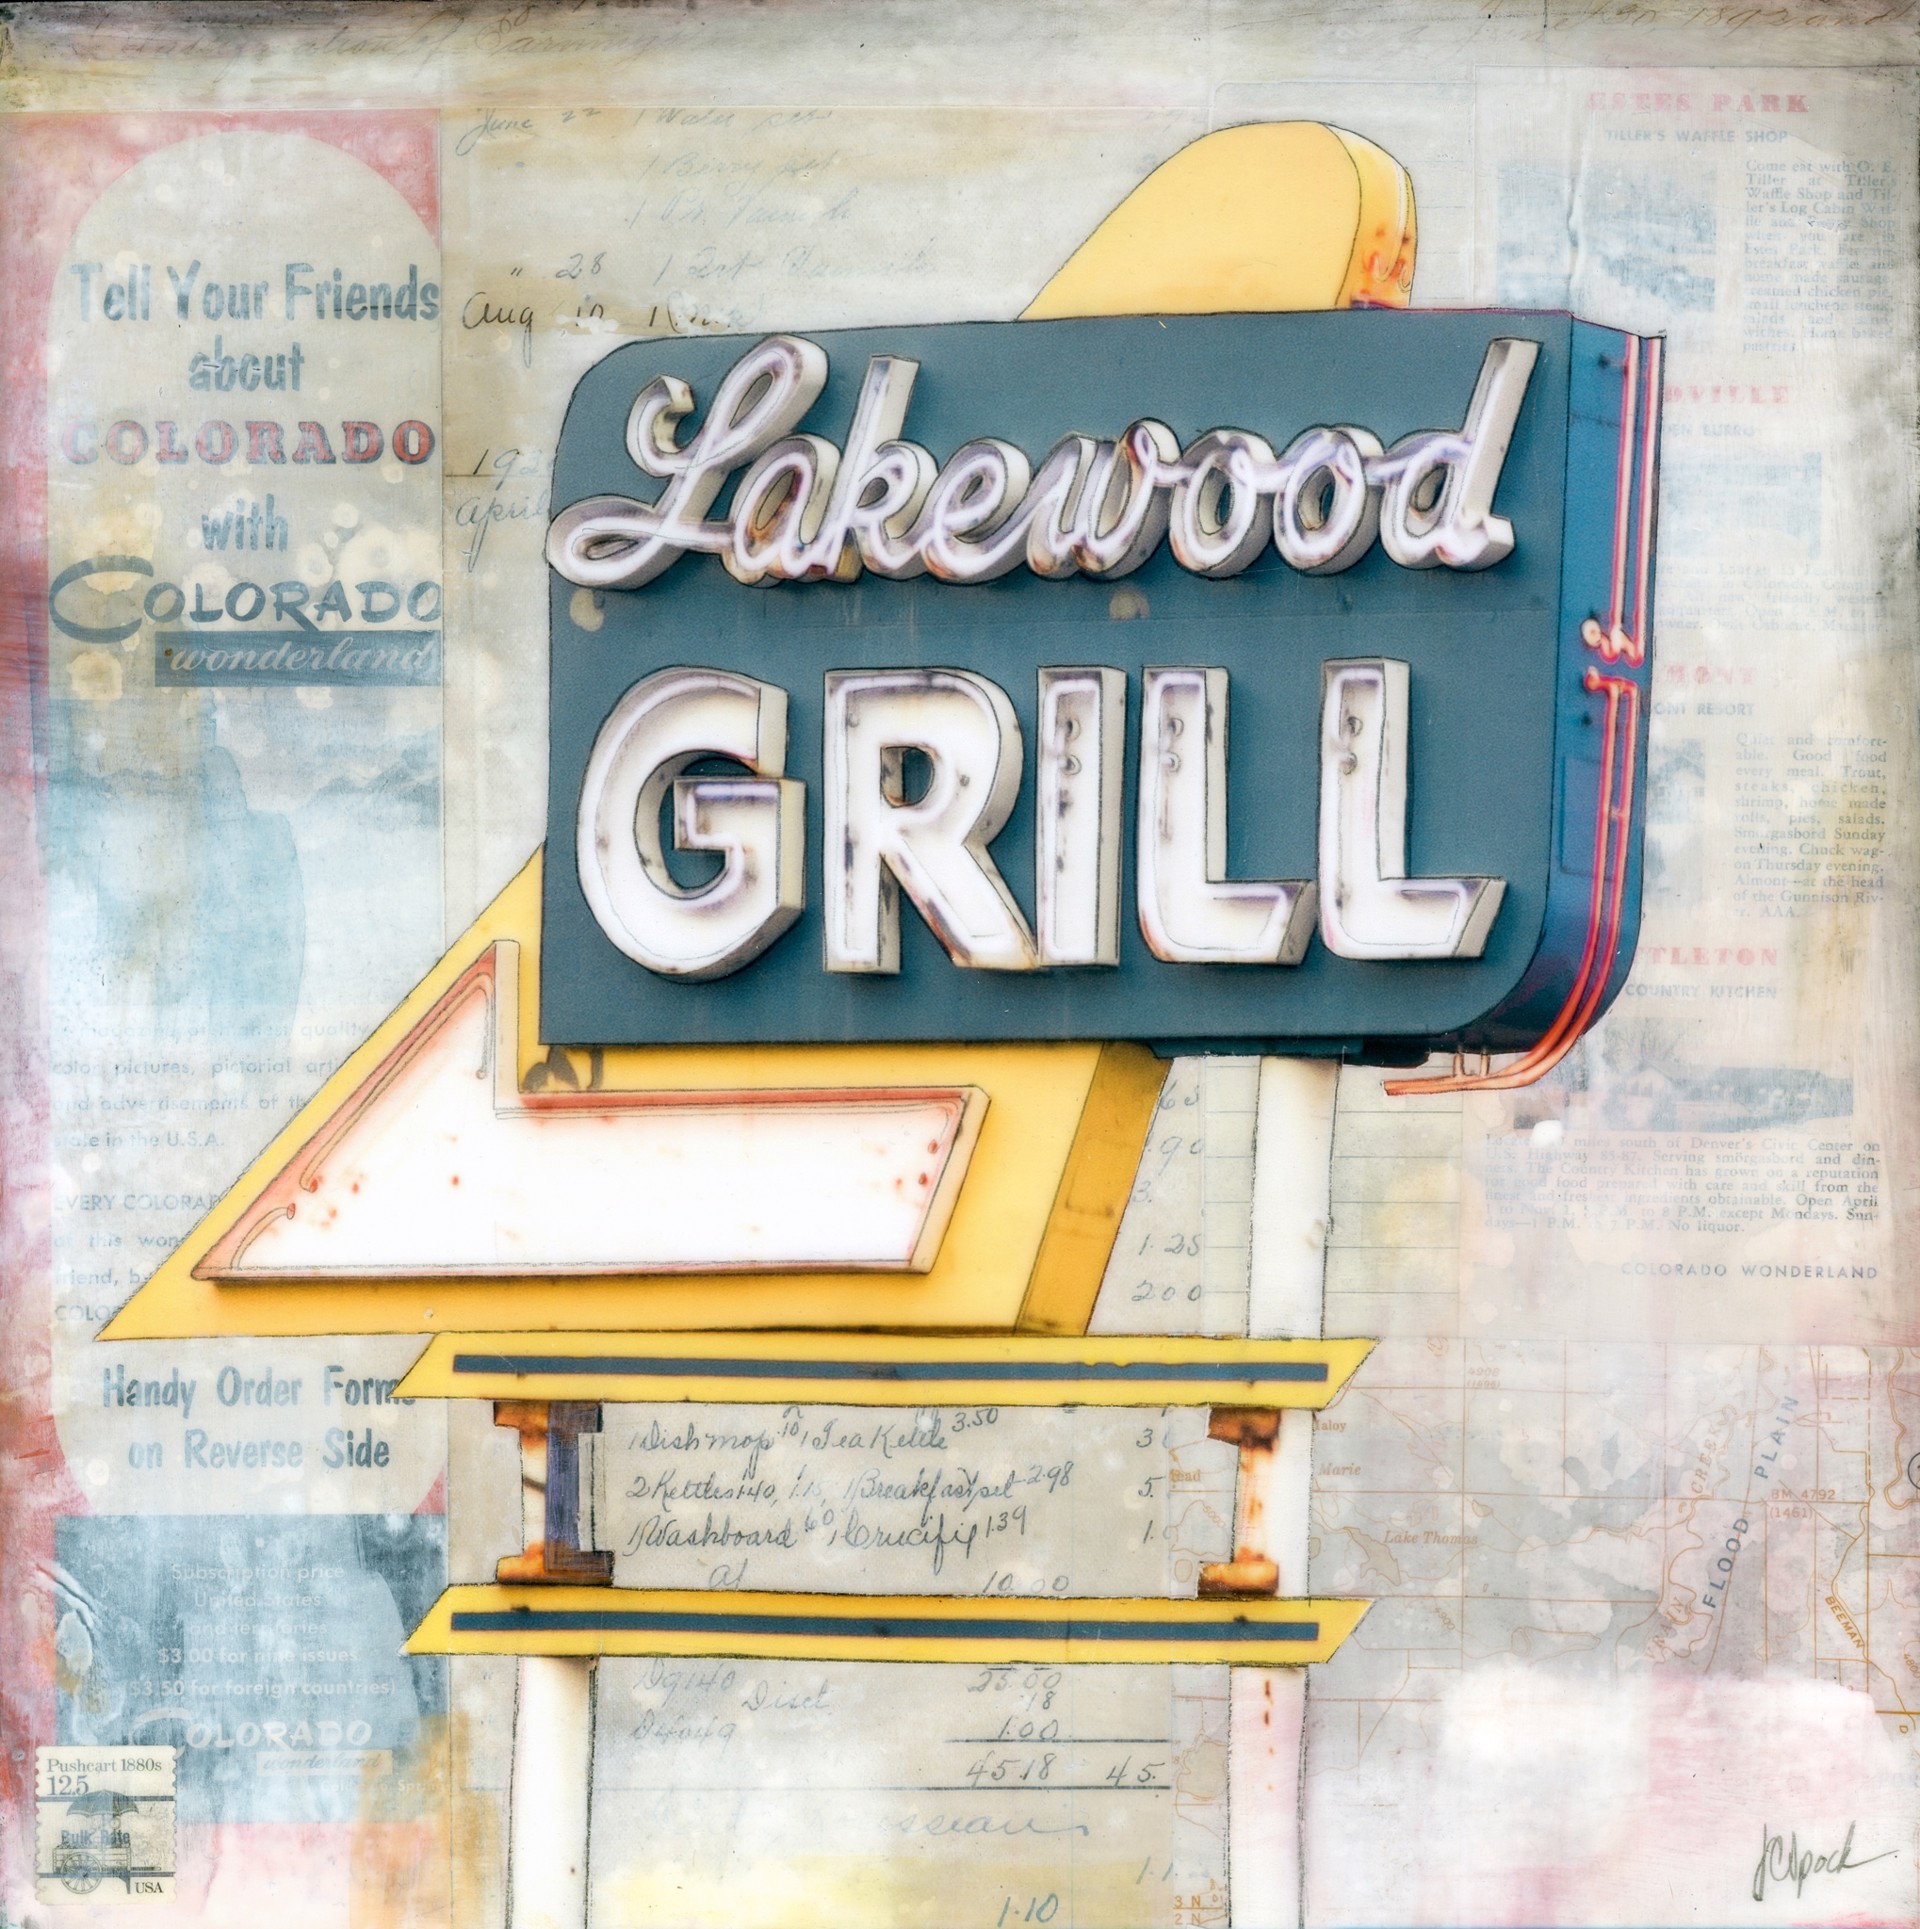 Lakewood Grill by JC Spock